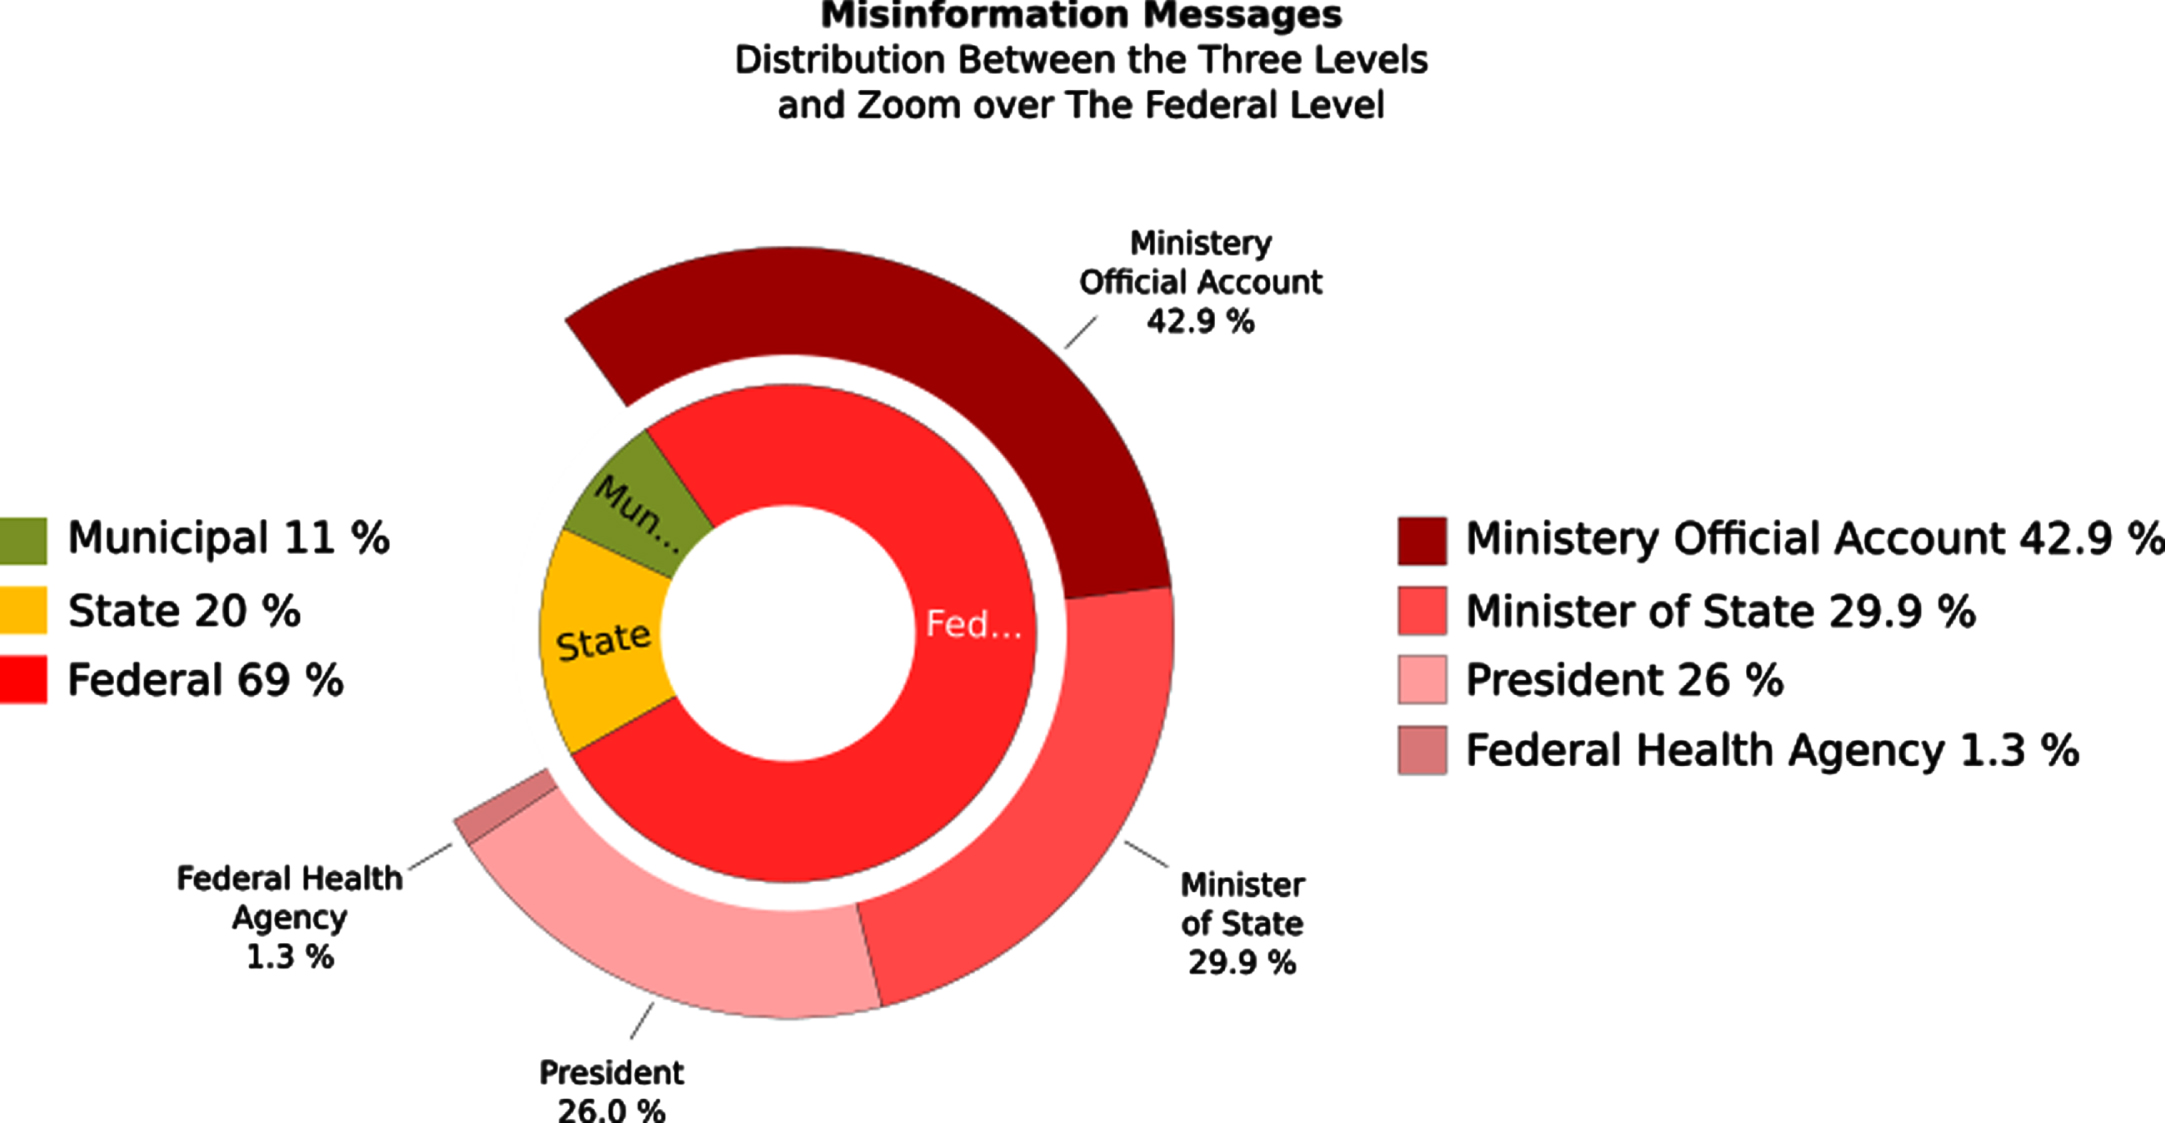 The distribution of misinformation messages between the three government levels and zoom over the federal level.